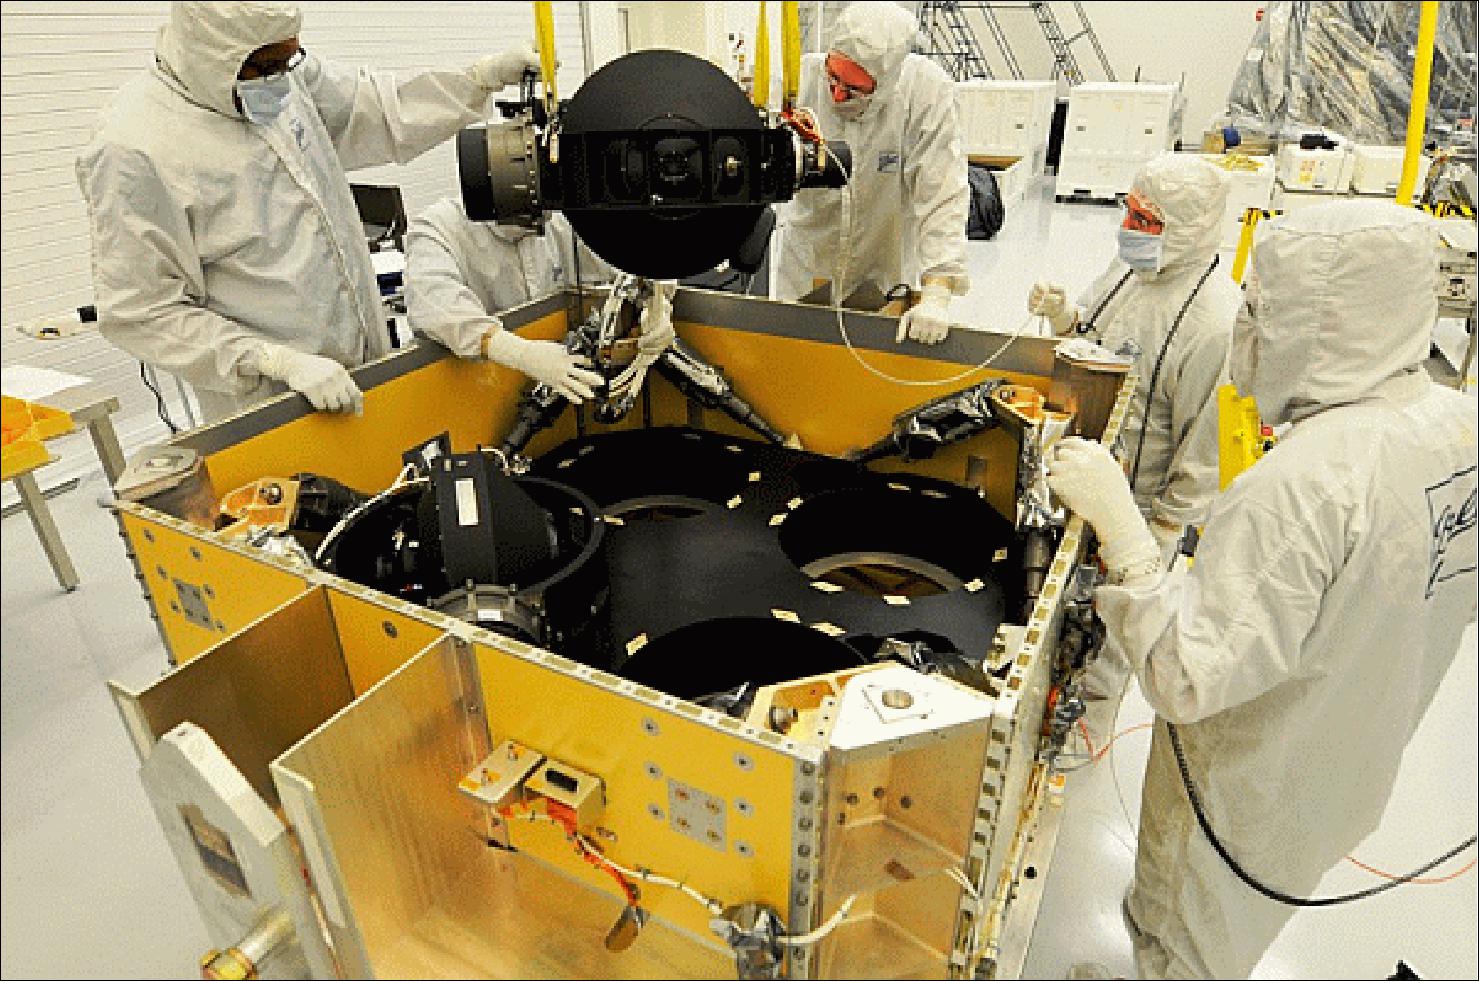 Figure 2: Ball Aerospace engineers install an advanced Control Moment Gyroscope into WorldView-3 (image credit: BATC)